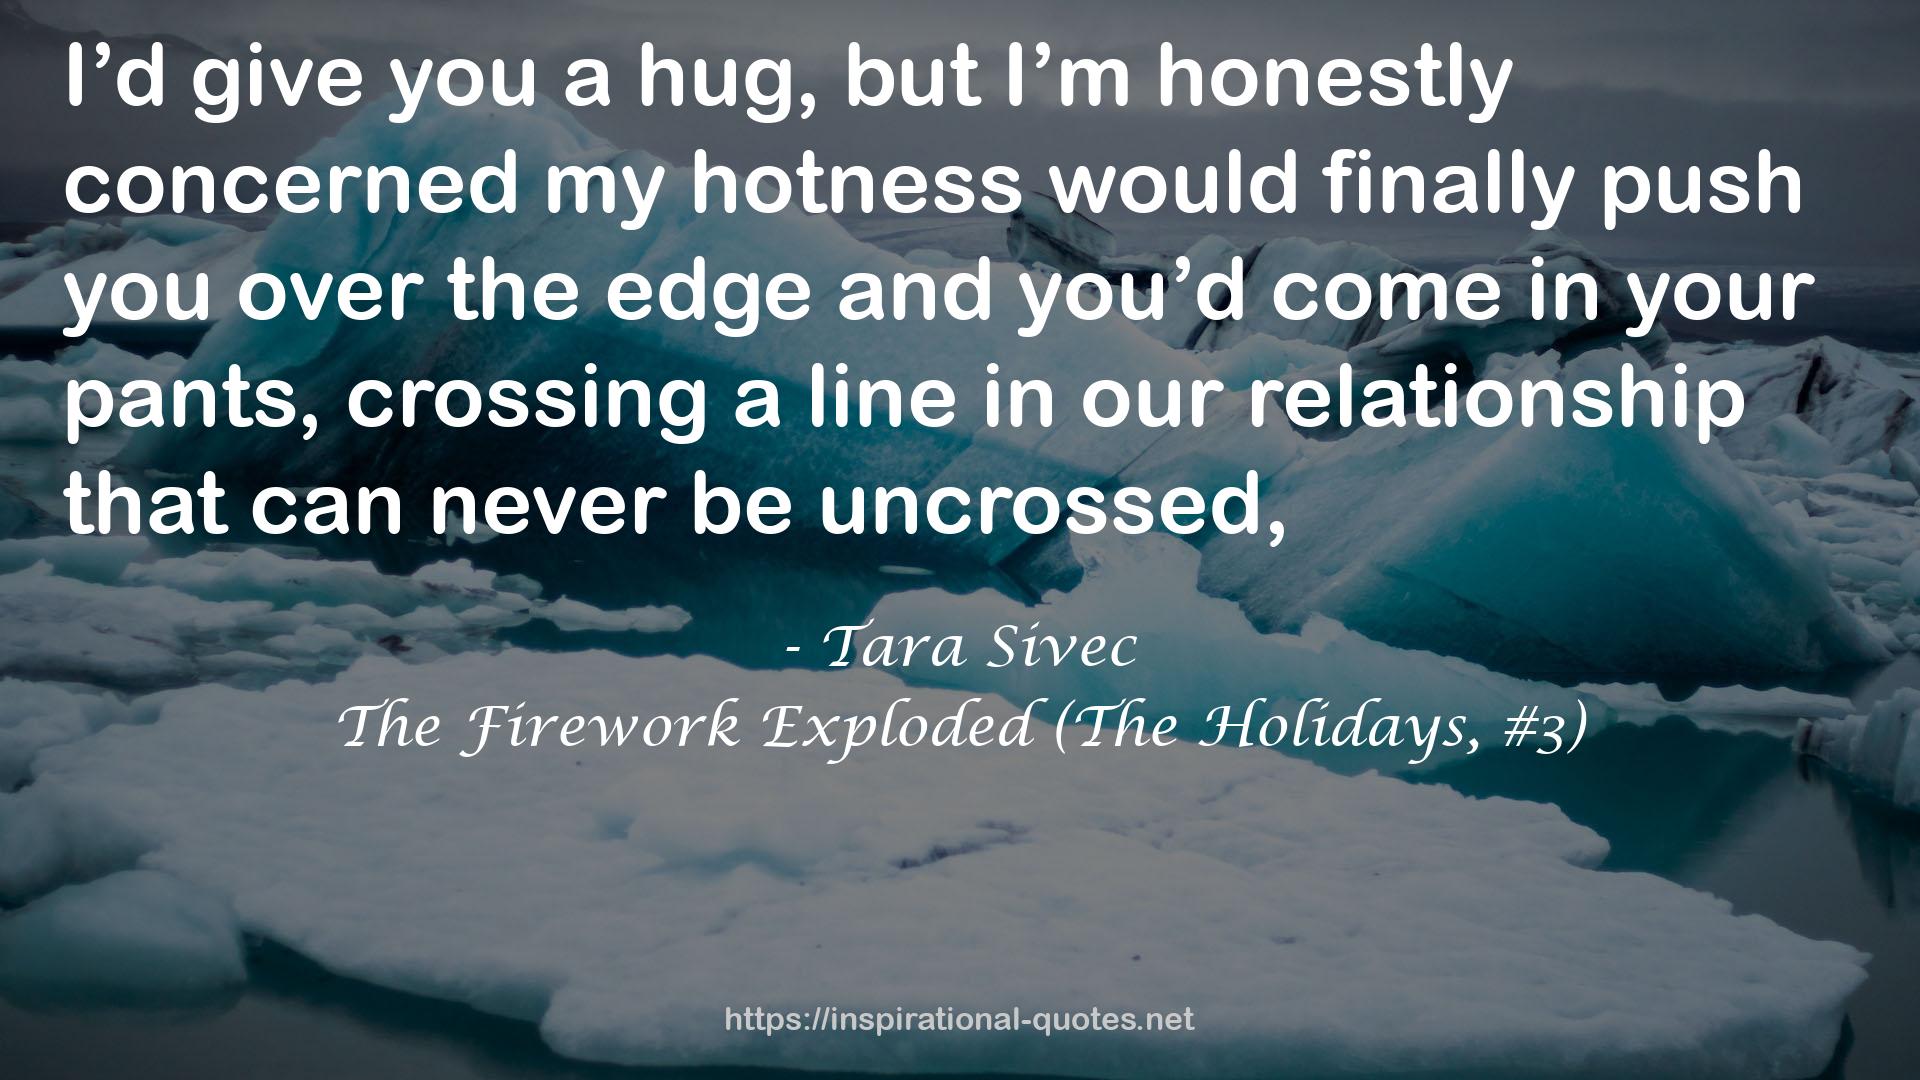 The Firework Exploded (The Holidays, #3) QUOTES